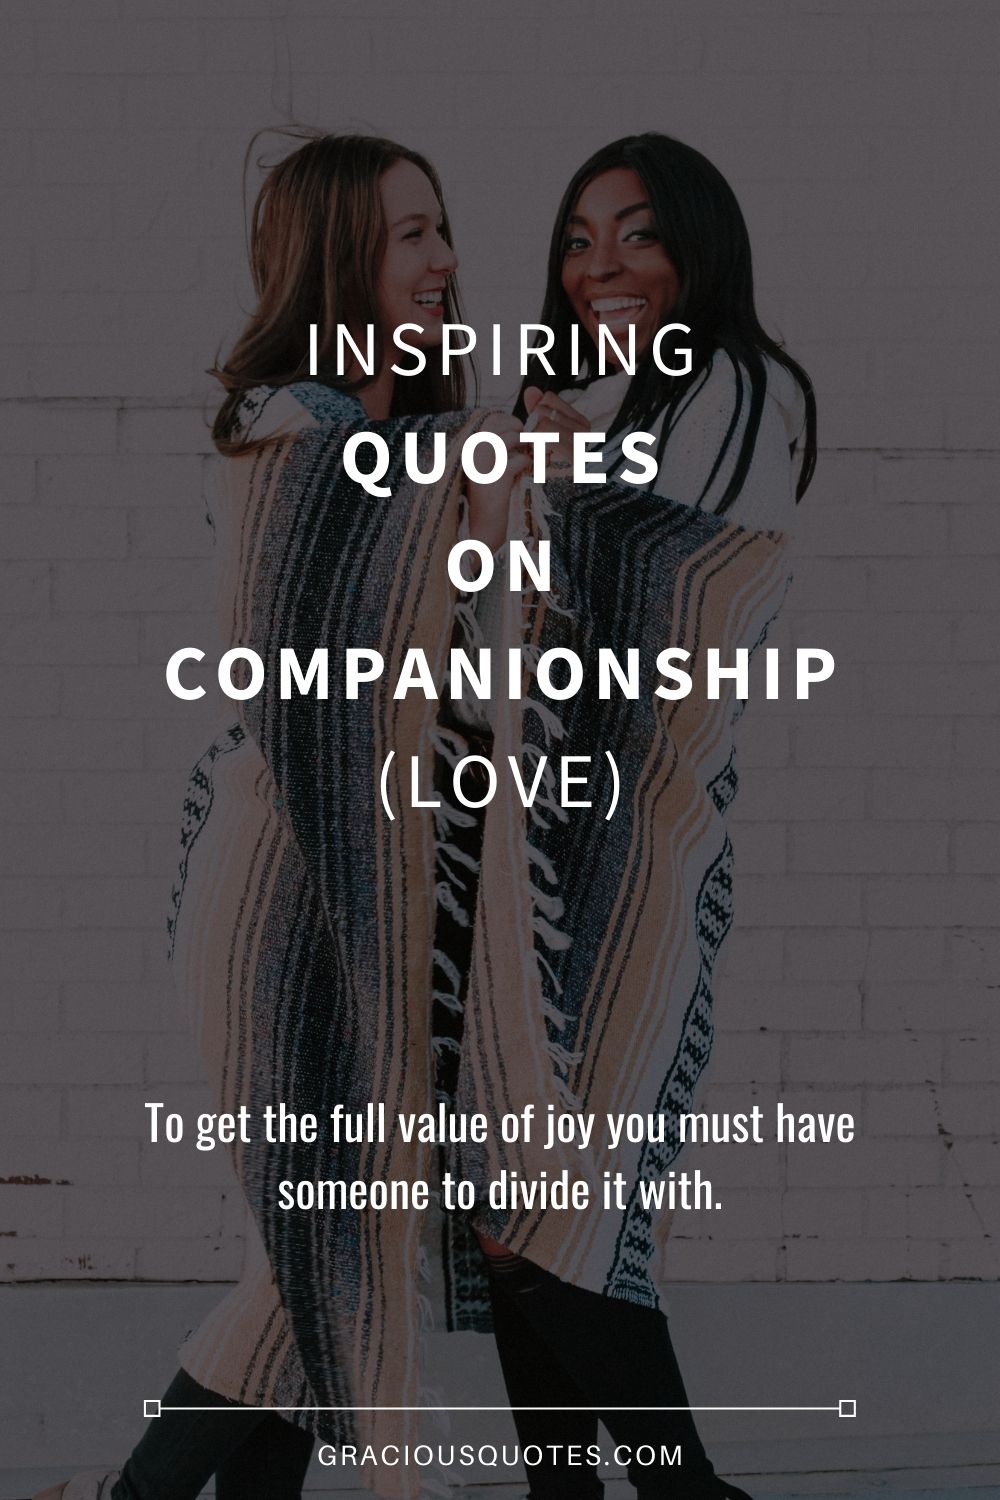 Inspiring Quotes on Companionship (LOVE) - Gracious Quotes